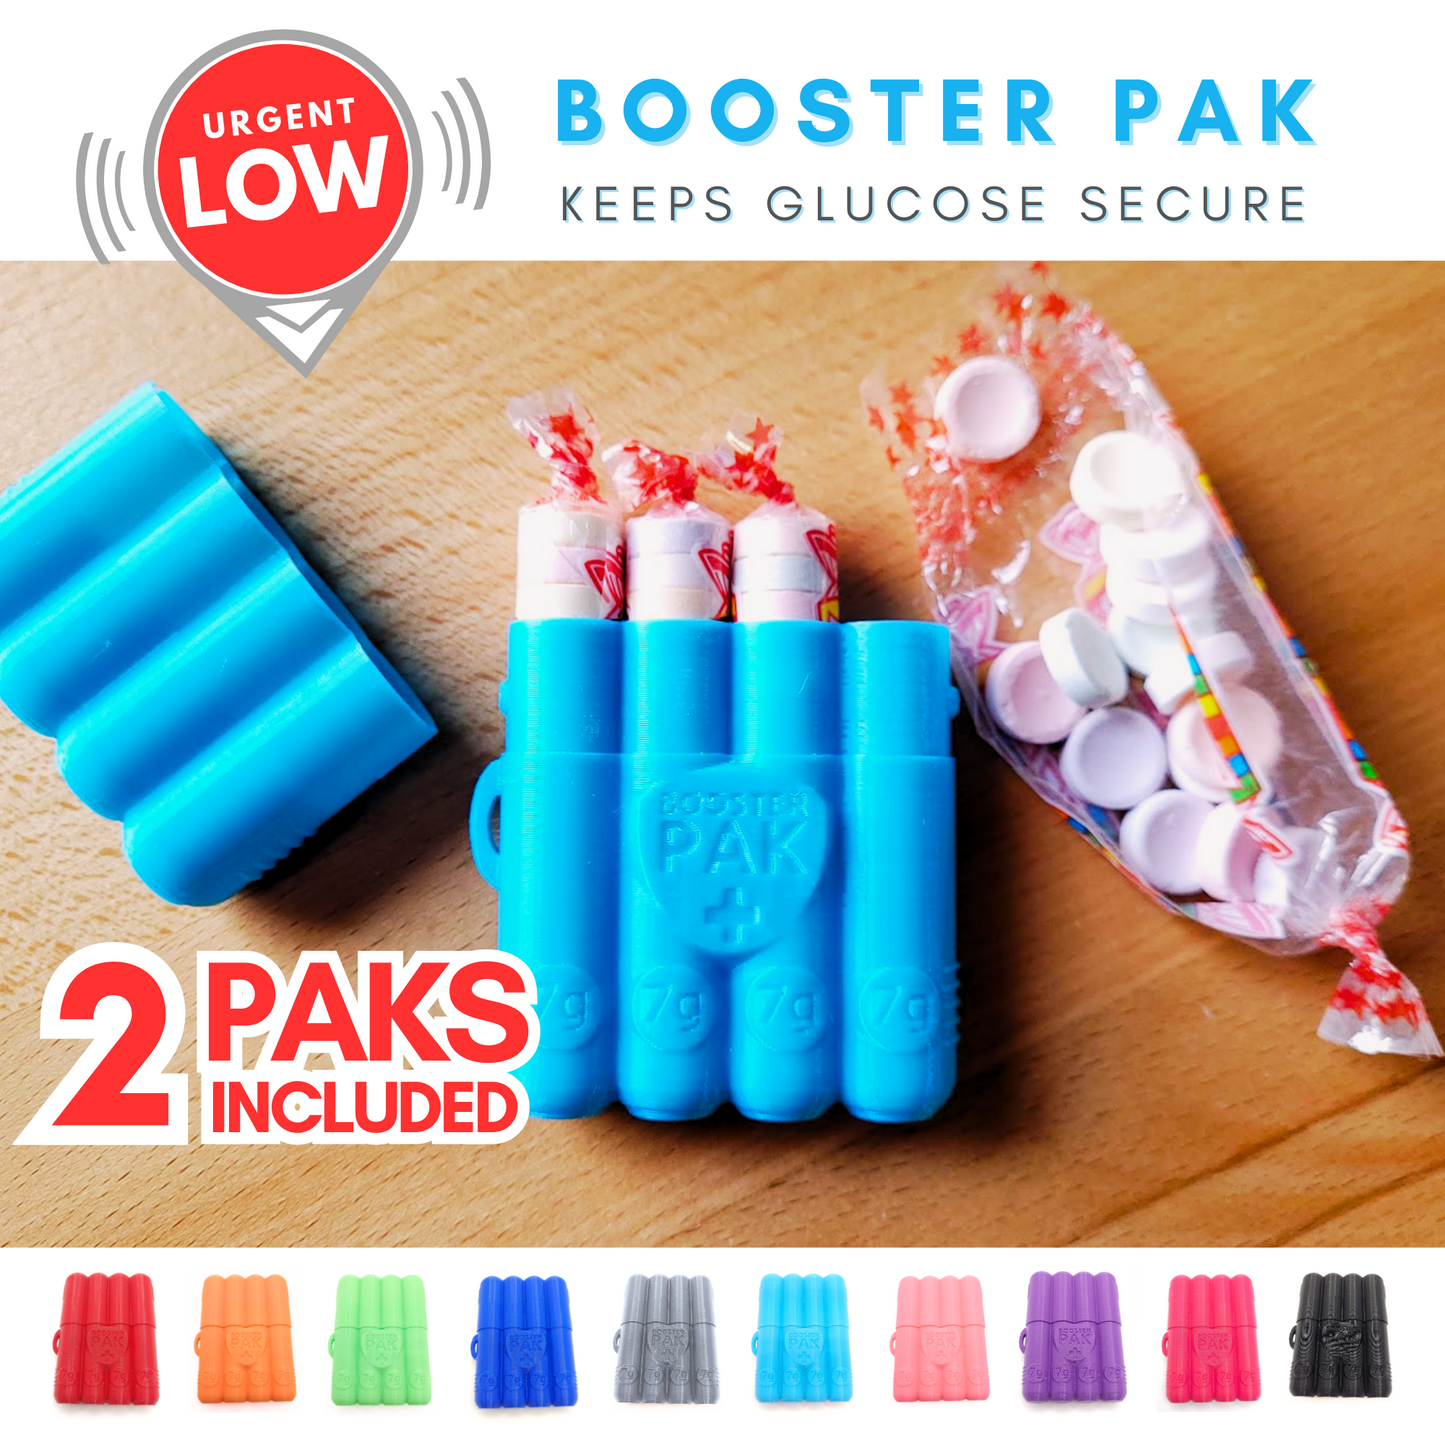 Booster Pak (2 pack)